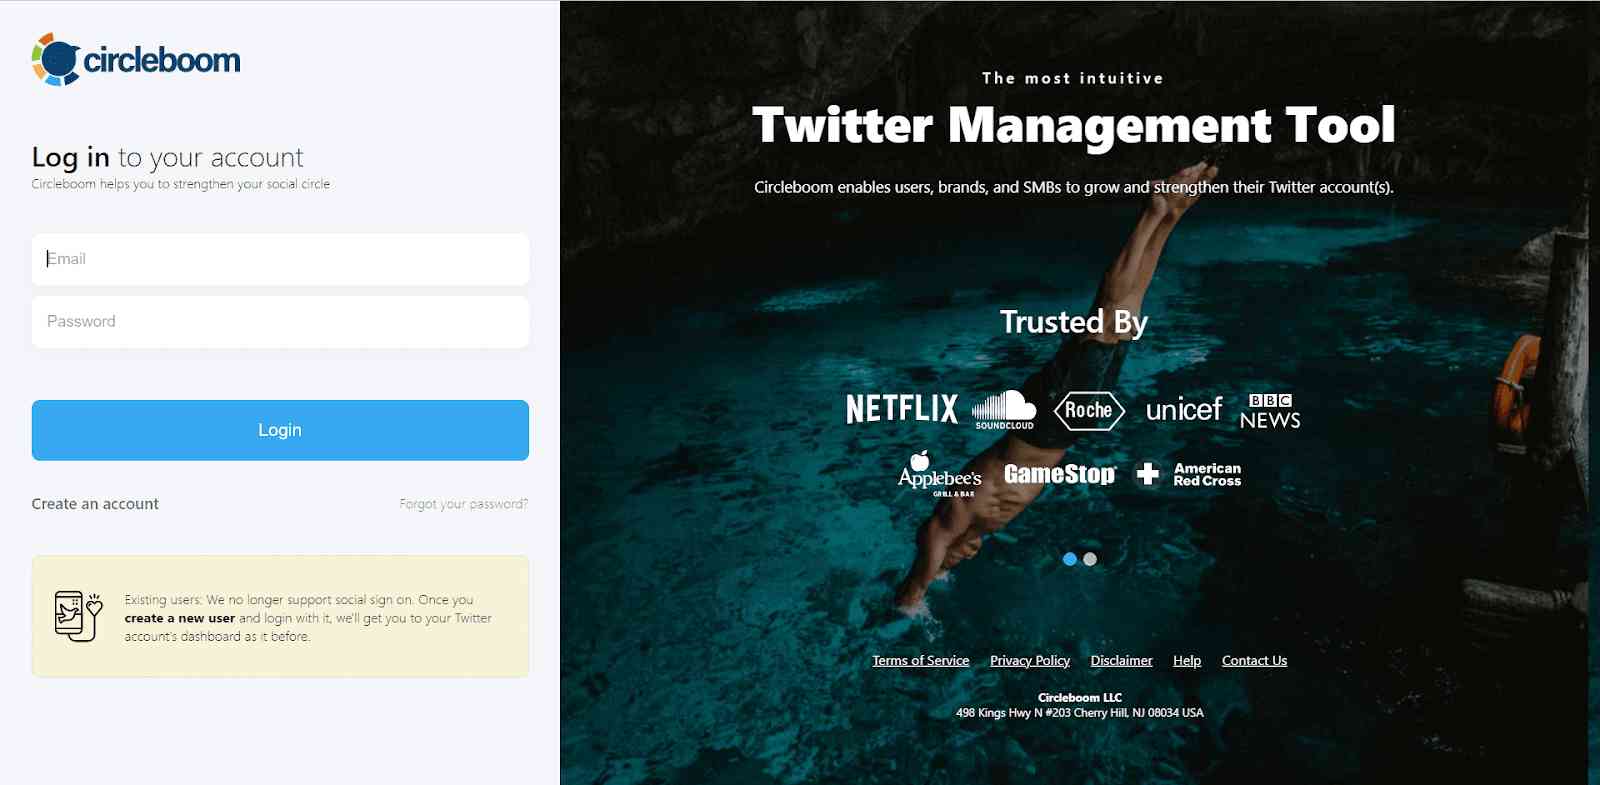 Circleboom Twitter helps you manage your Twitter account and grow your business on Twitter with its excellent Twitter management tools